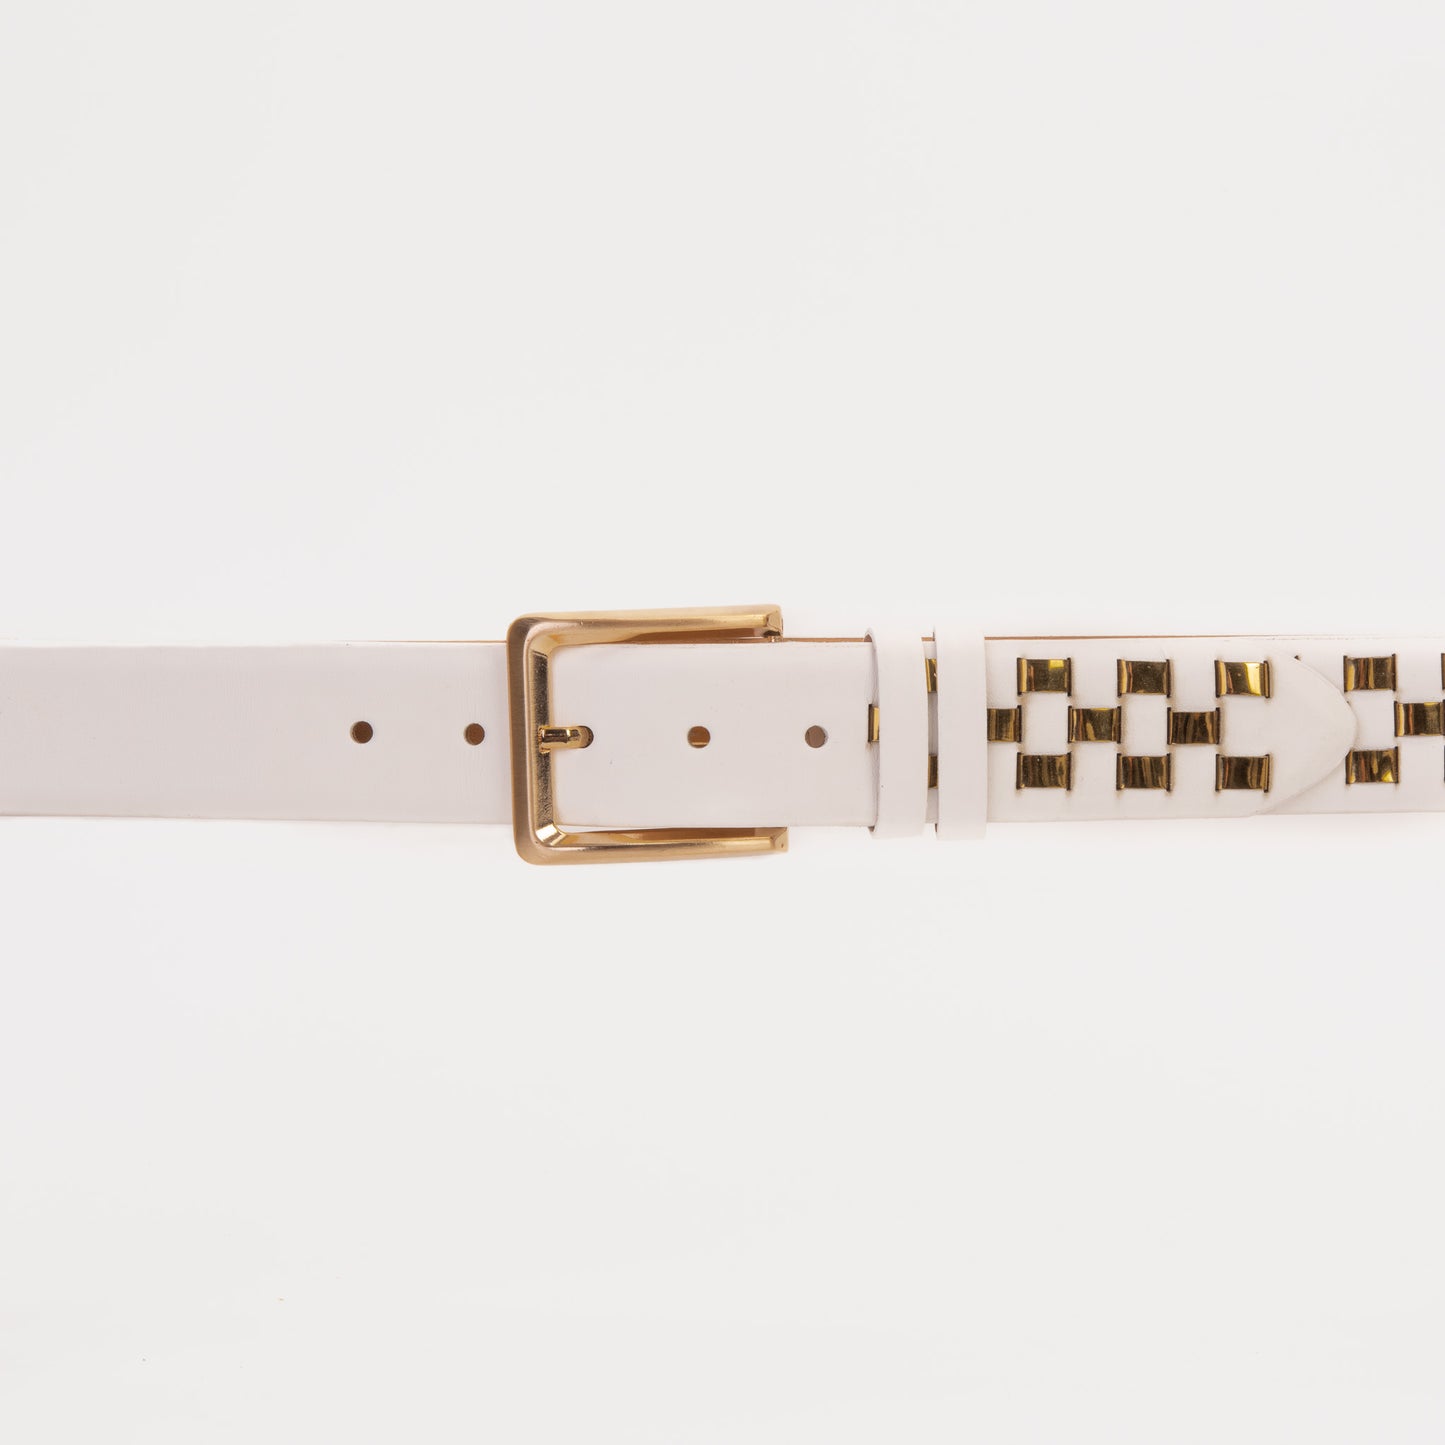 The Messina White & Gold Woven Leather Belt